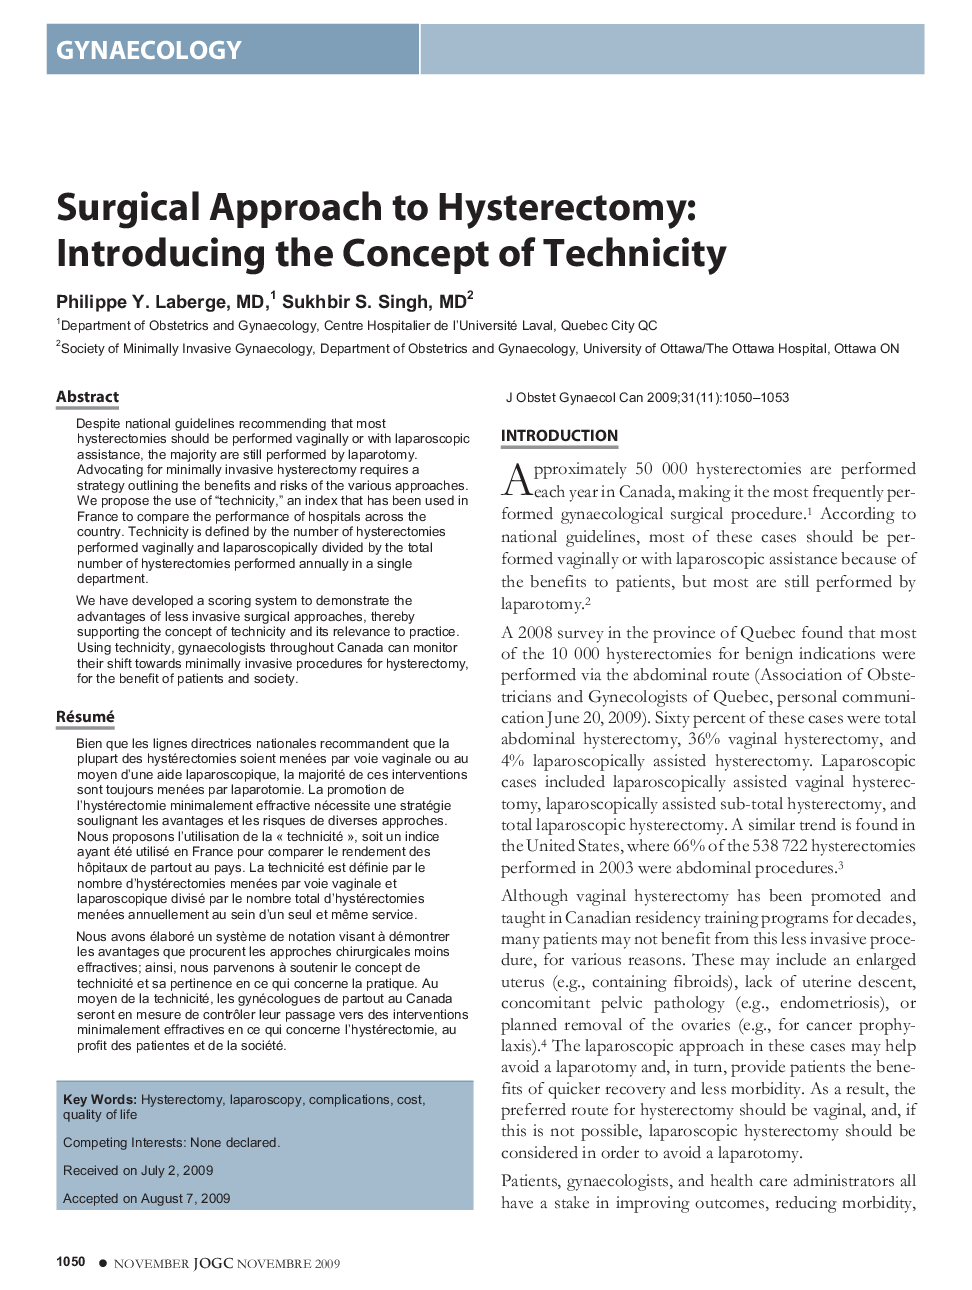 Surgical Approach to Hysterectomy: Introducing the Concept of Technicity